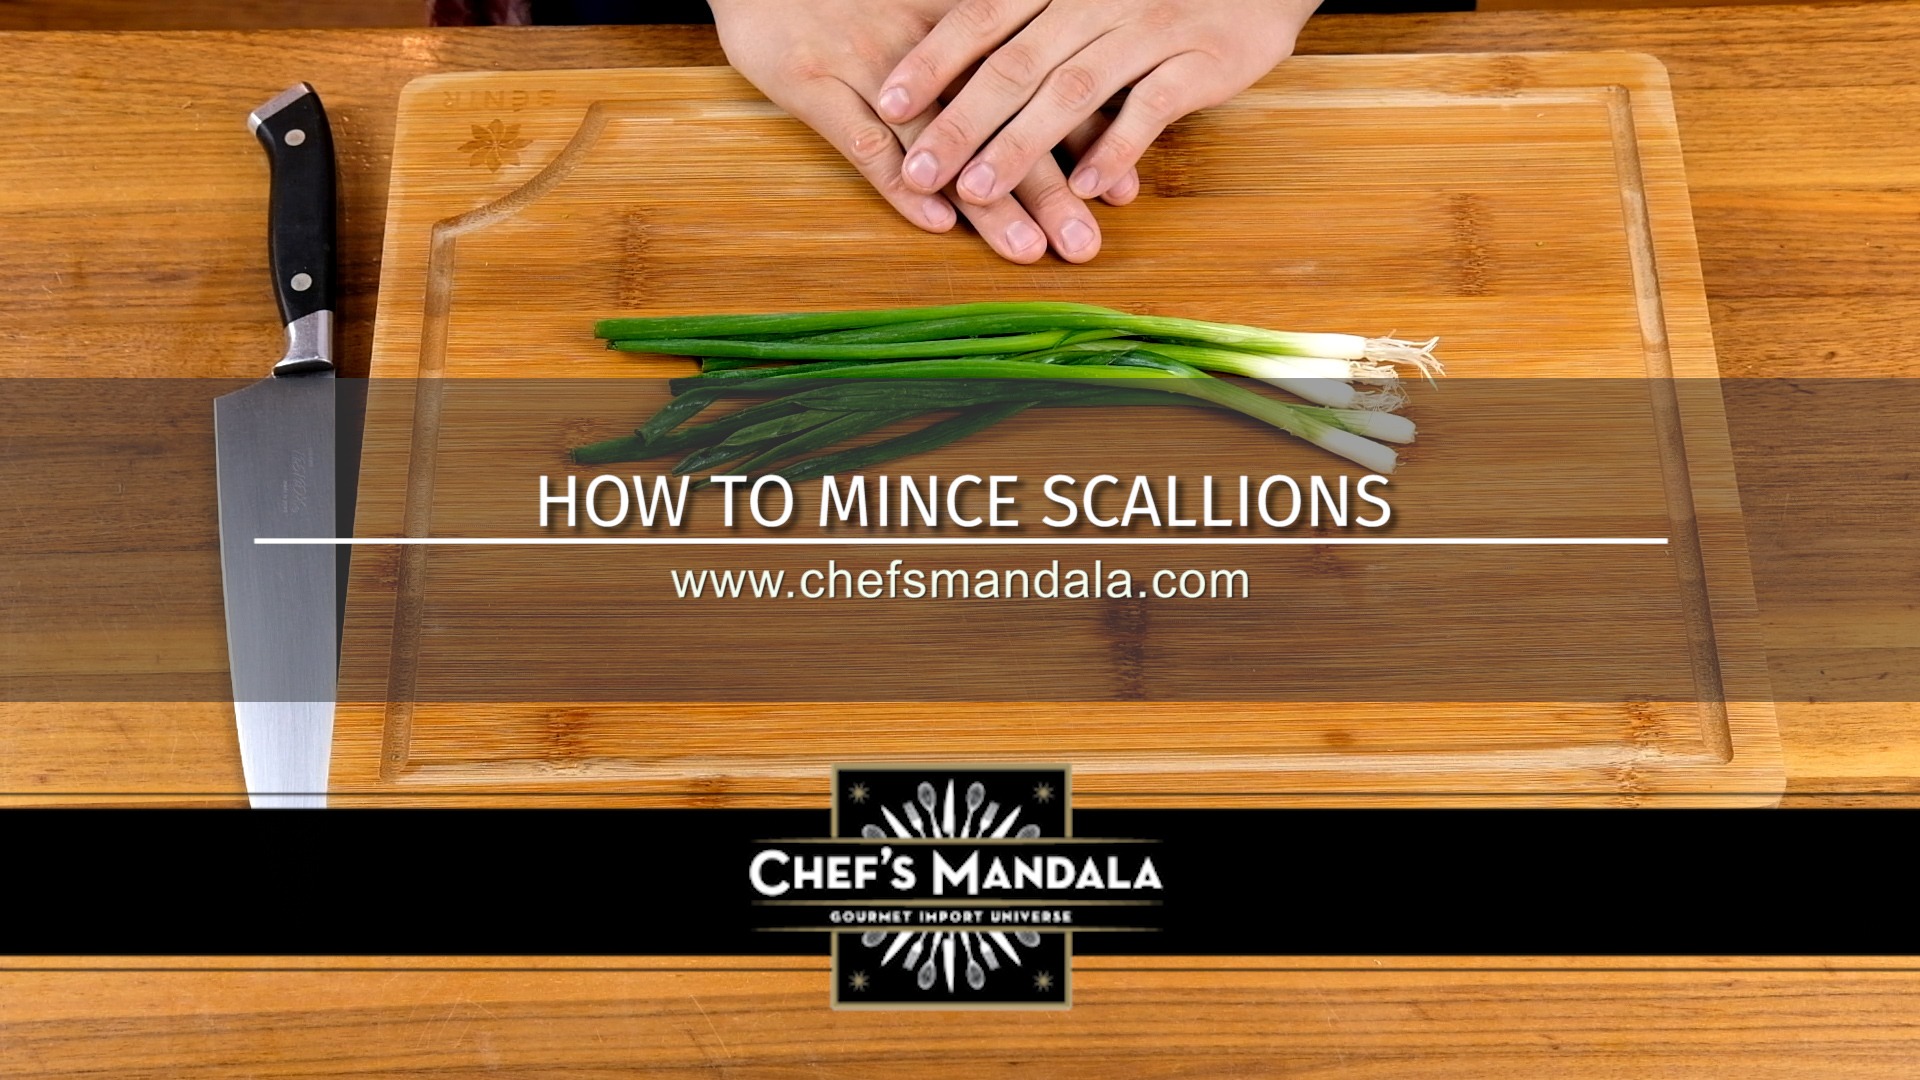 HOW TO MINCE SCALLIONS